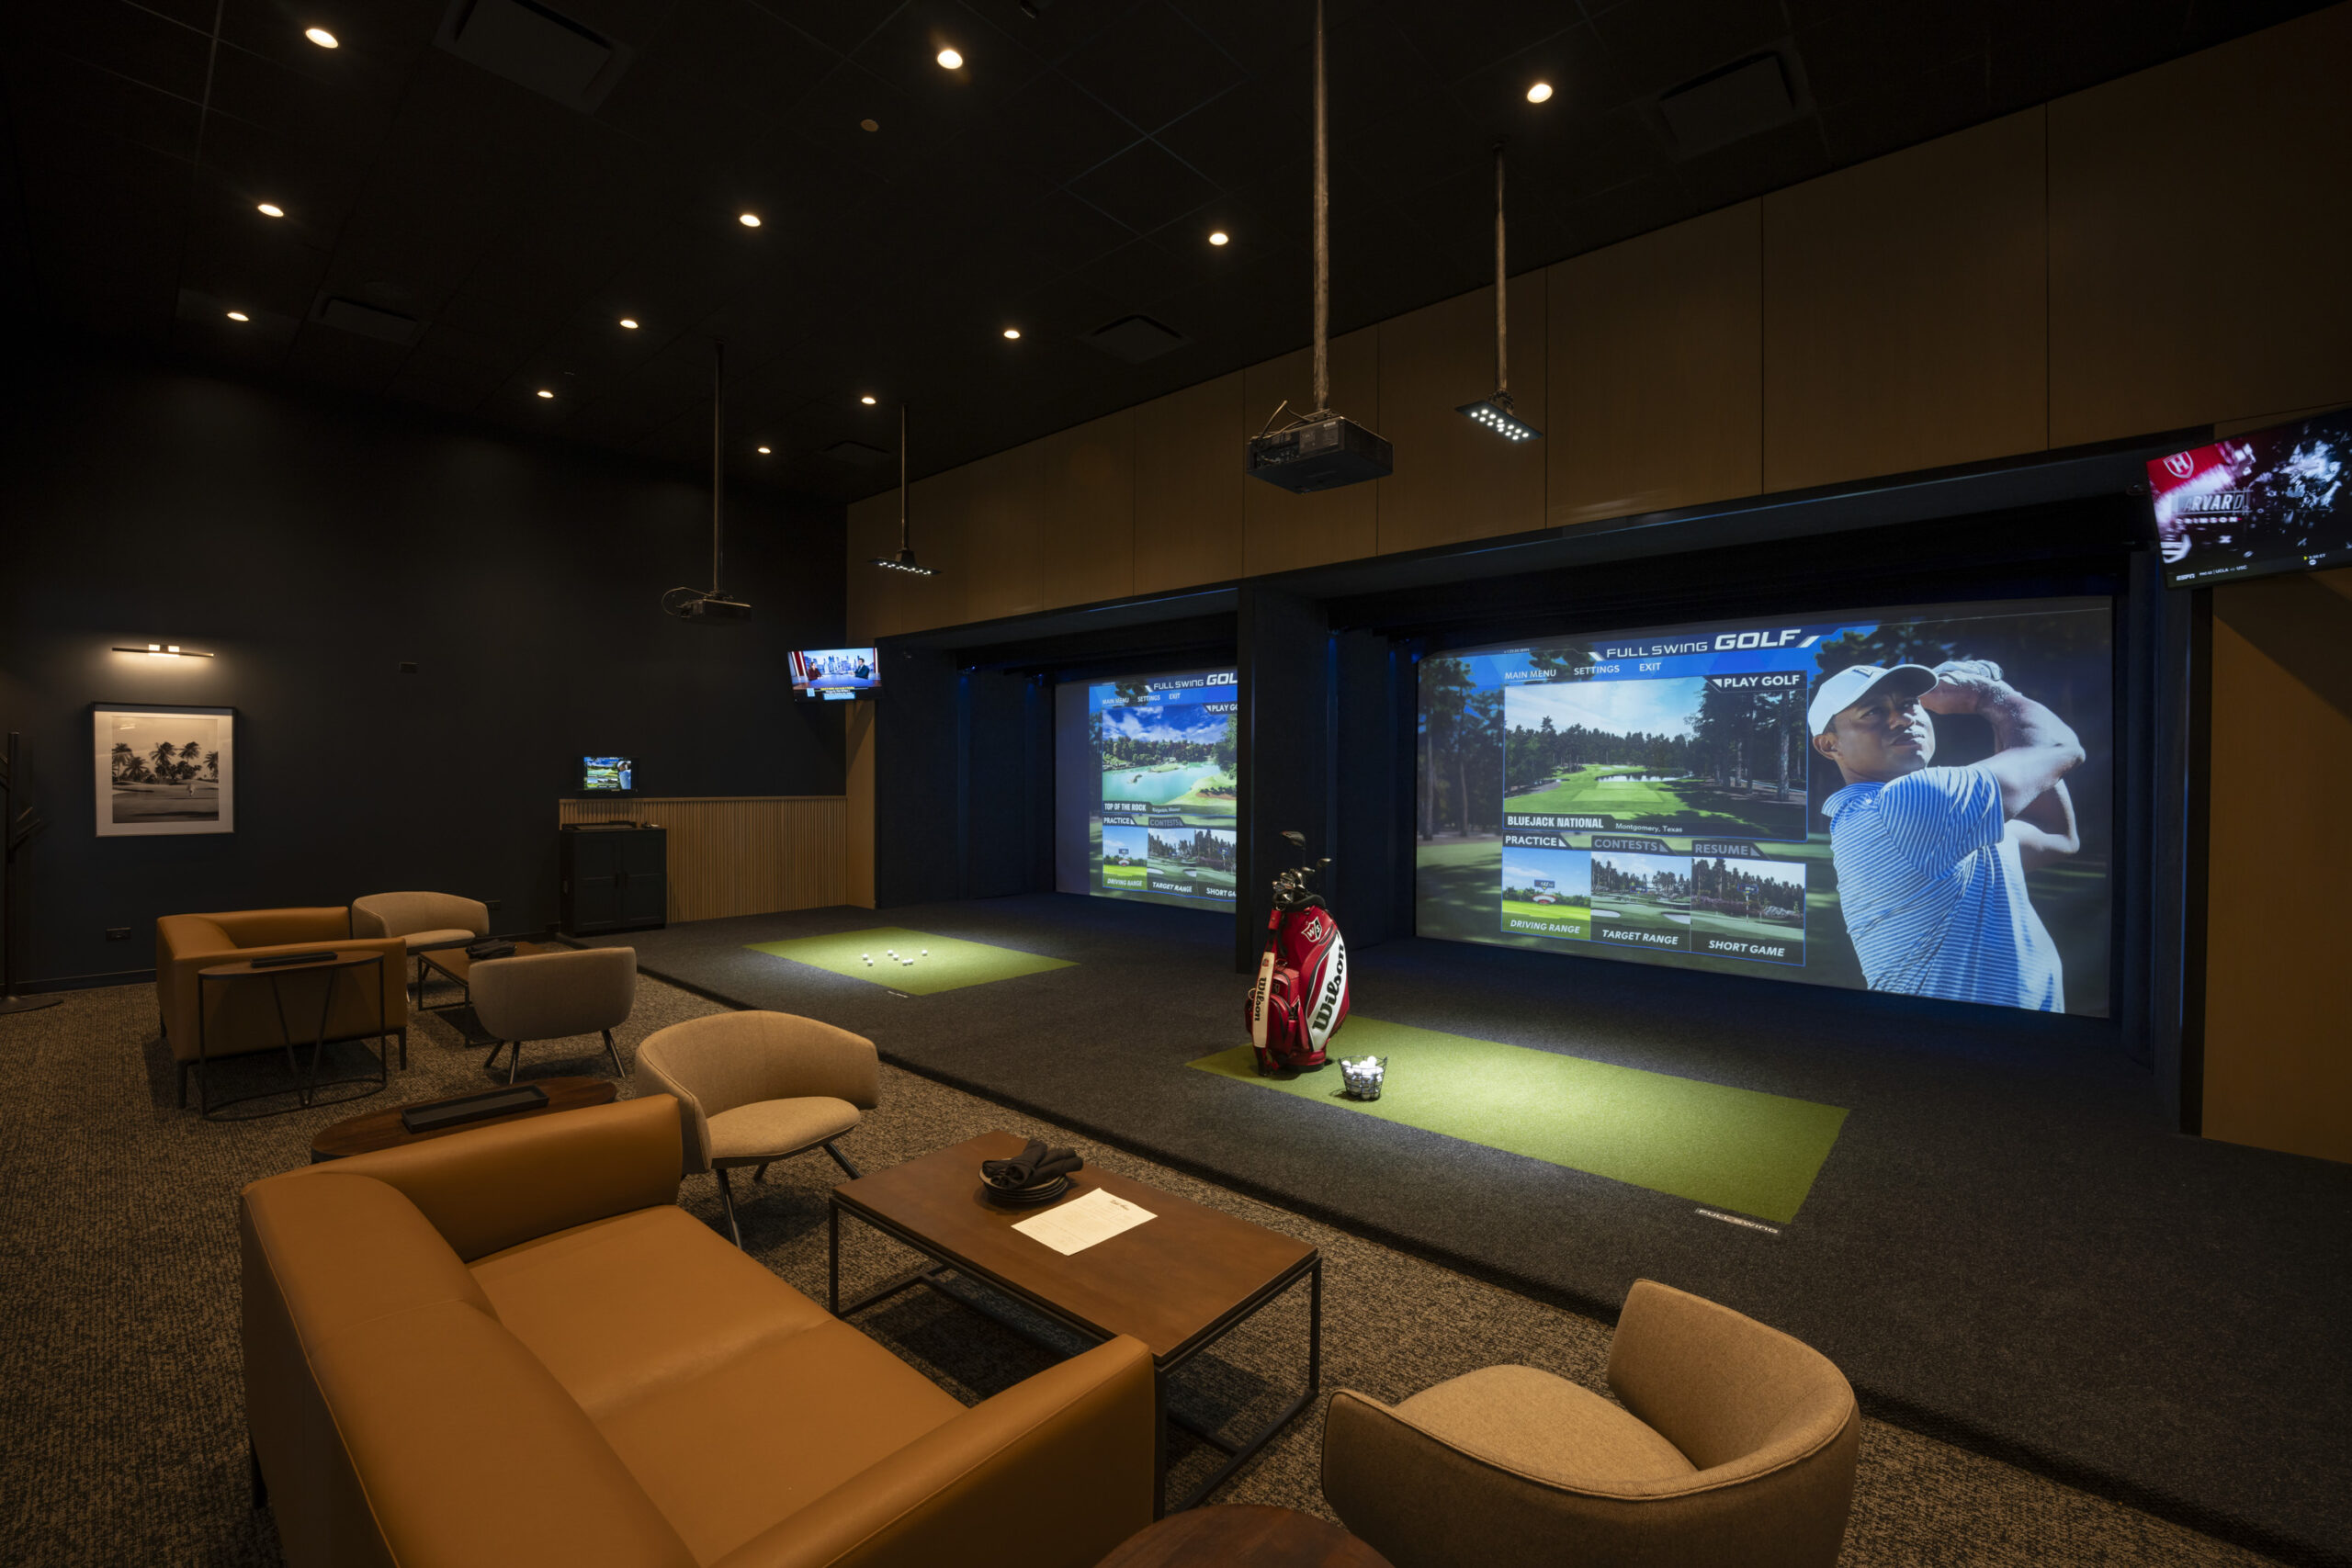 Two modern golf simulators featuring large projection screens, stage lighting and lounge seating.